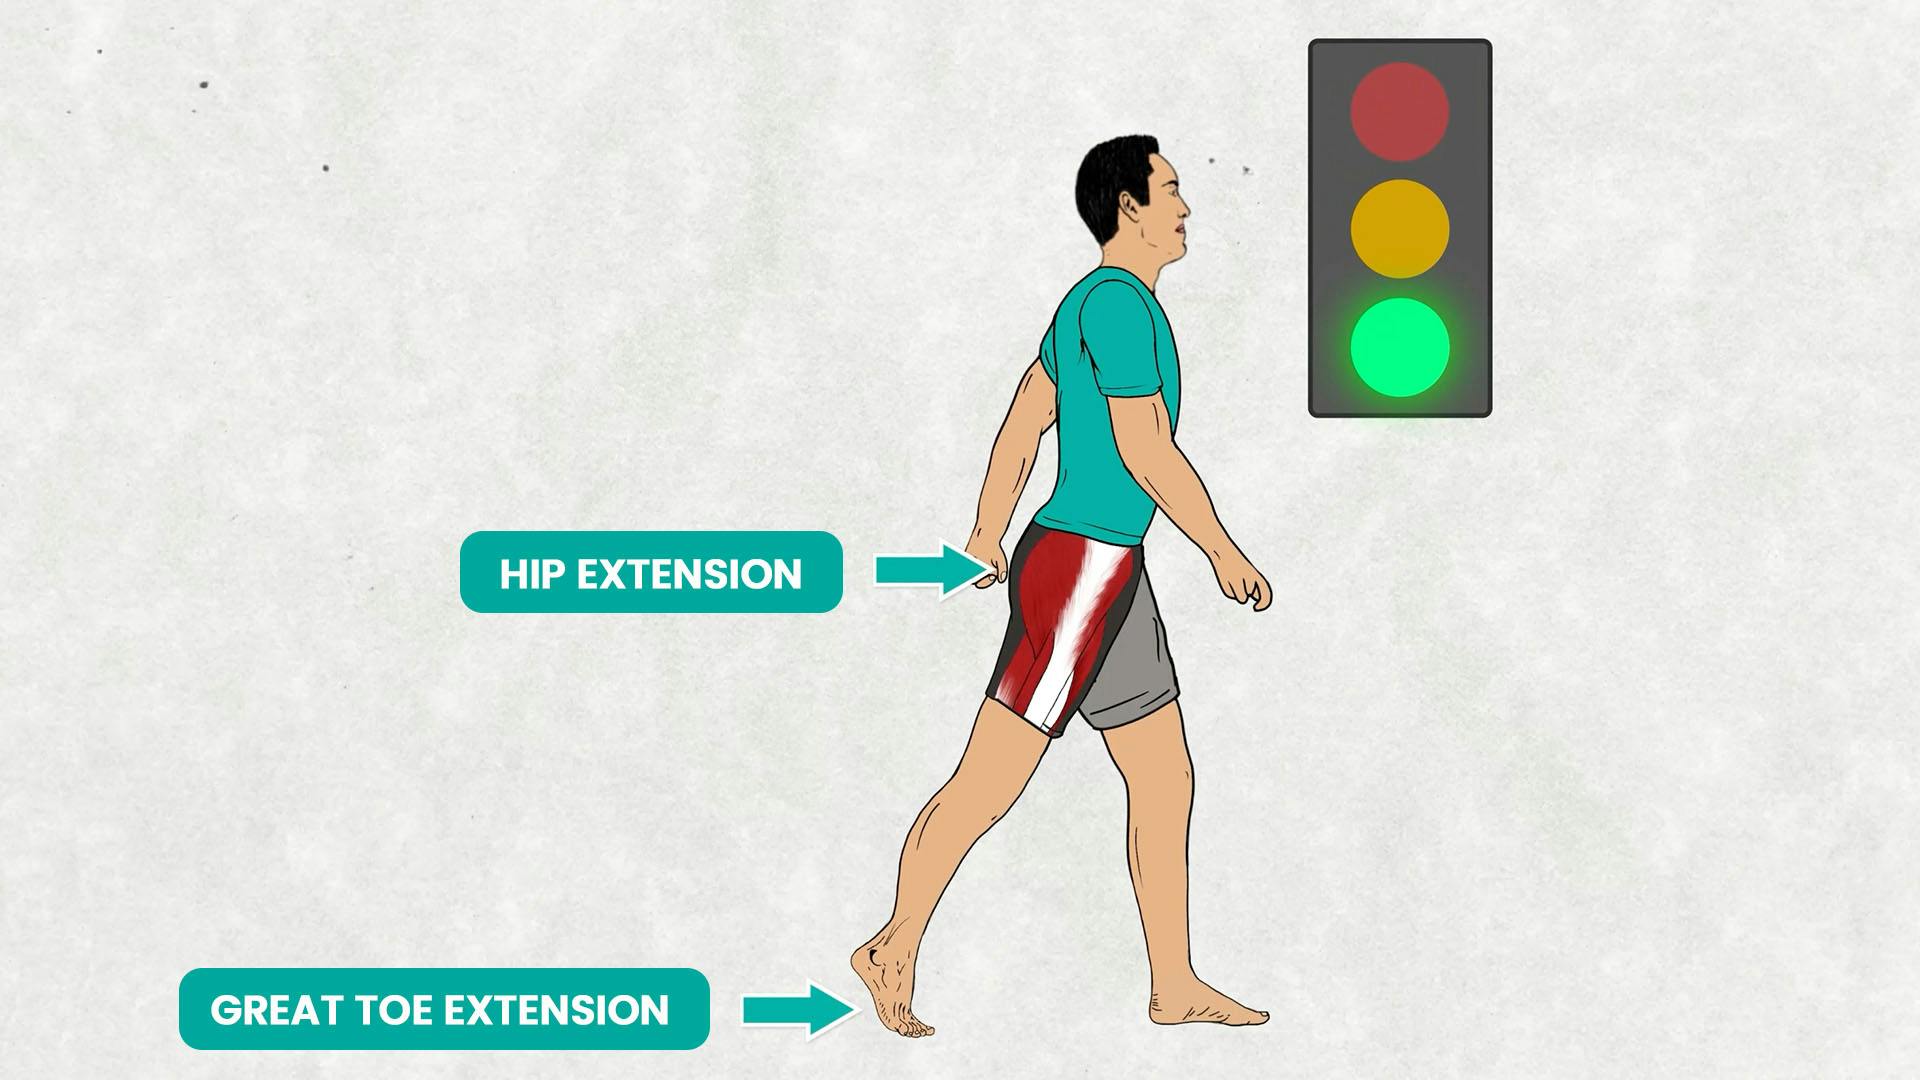 Great Toe Extension Increases Hip Extension